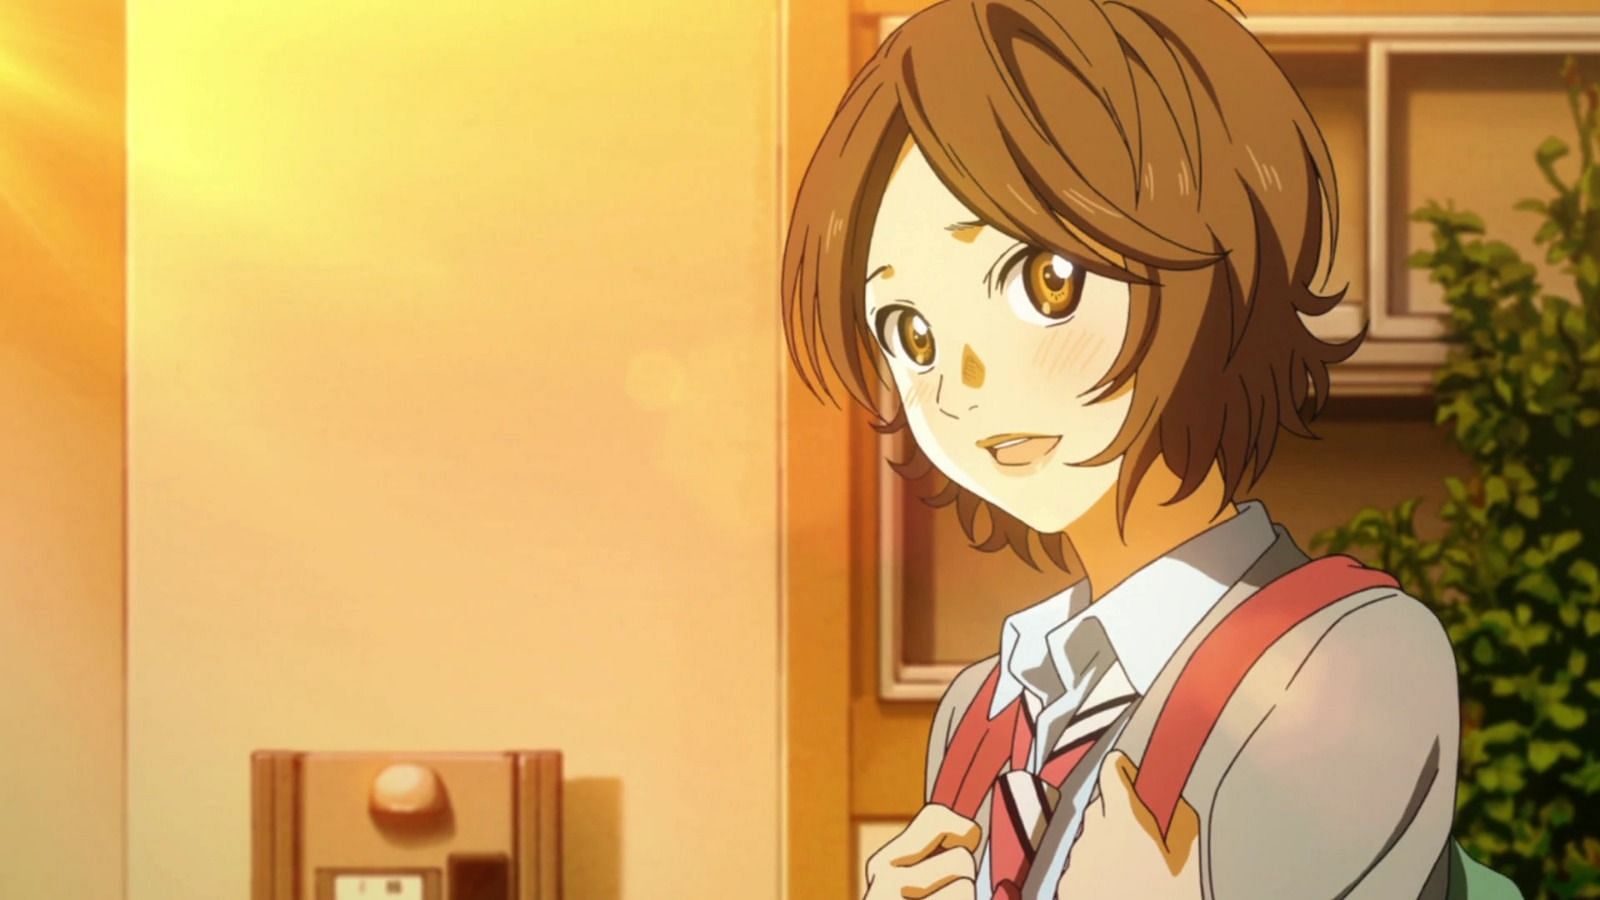 Tsubaki in Your Lie in April (image via A1 Pictures)